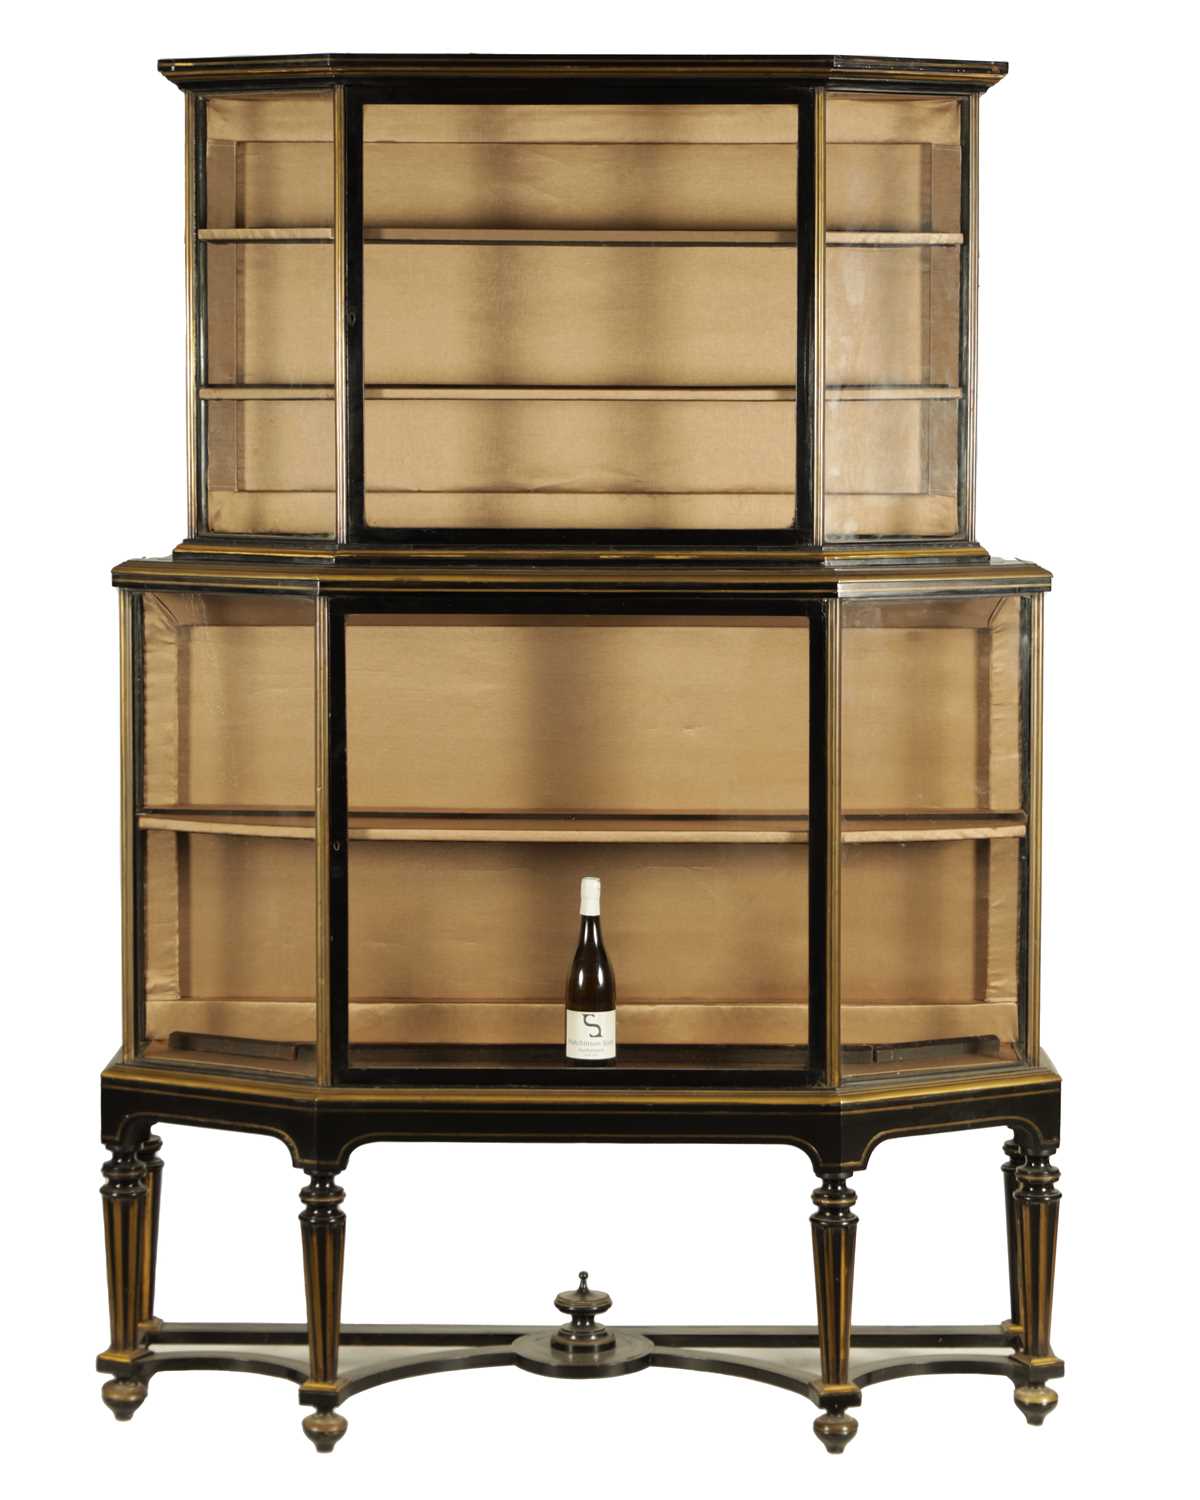 A 19TH CENTURY FRENCH EBONISED AND BRASS INLAID DISPLAY CABINET - Image 4 of 6